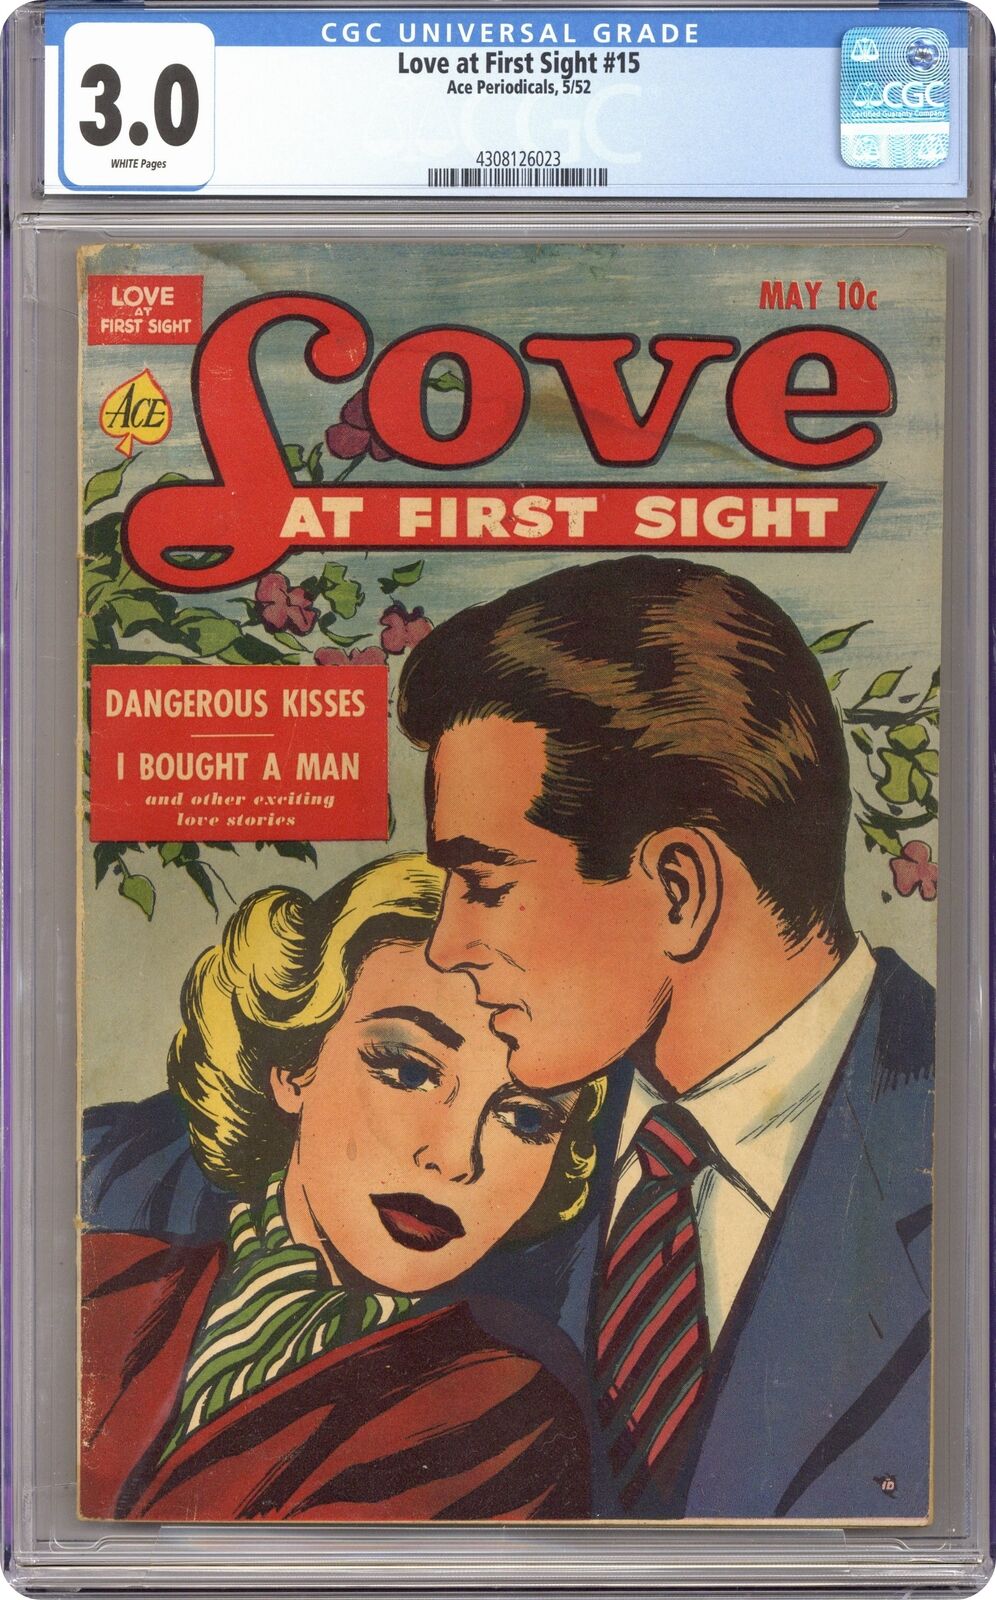 Love at First Sight #15 CGC 3.0 1951 4308126023